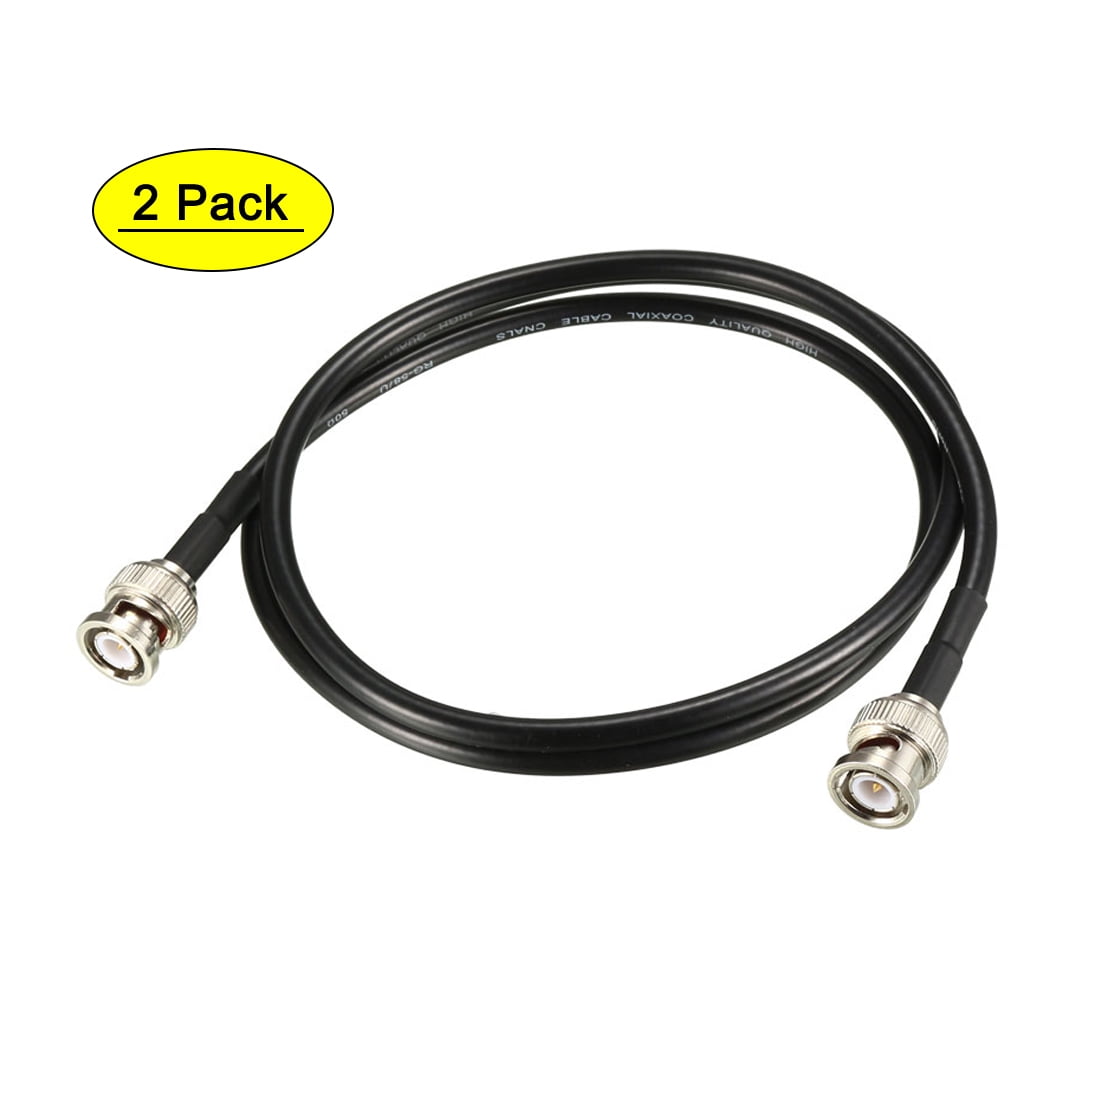 USA-CA RG58 BNC MALE to SMA MALE Coaxial RF Pigtail Cable 